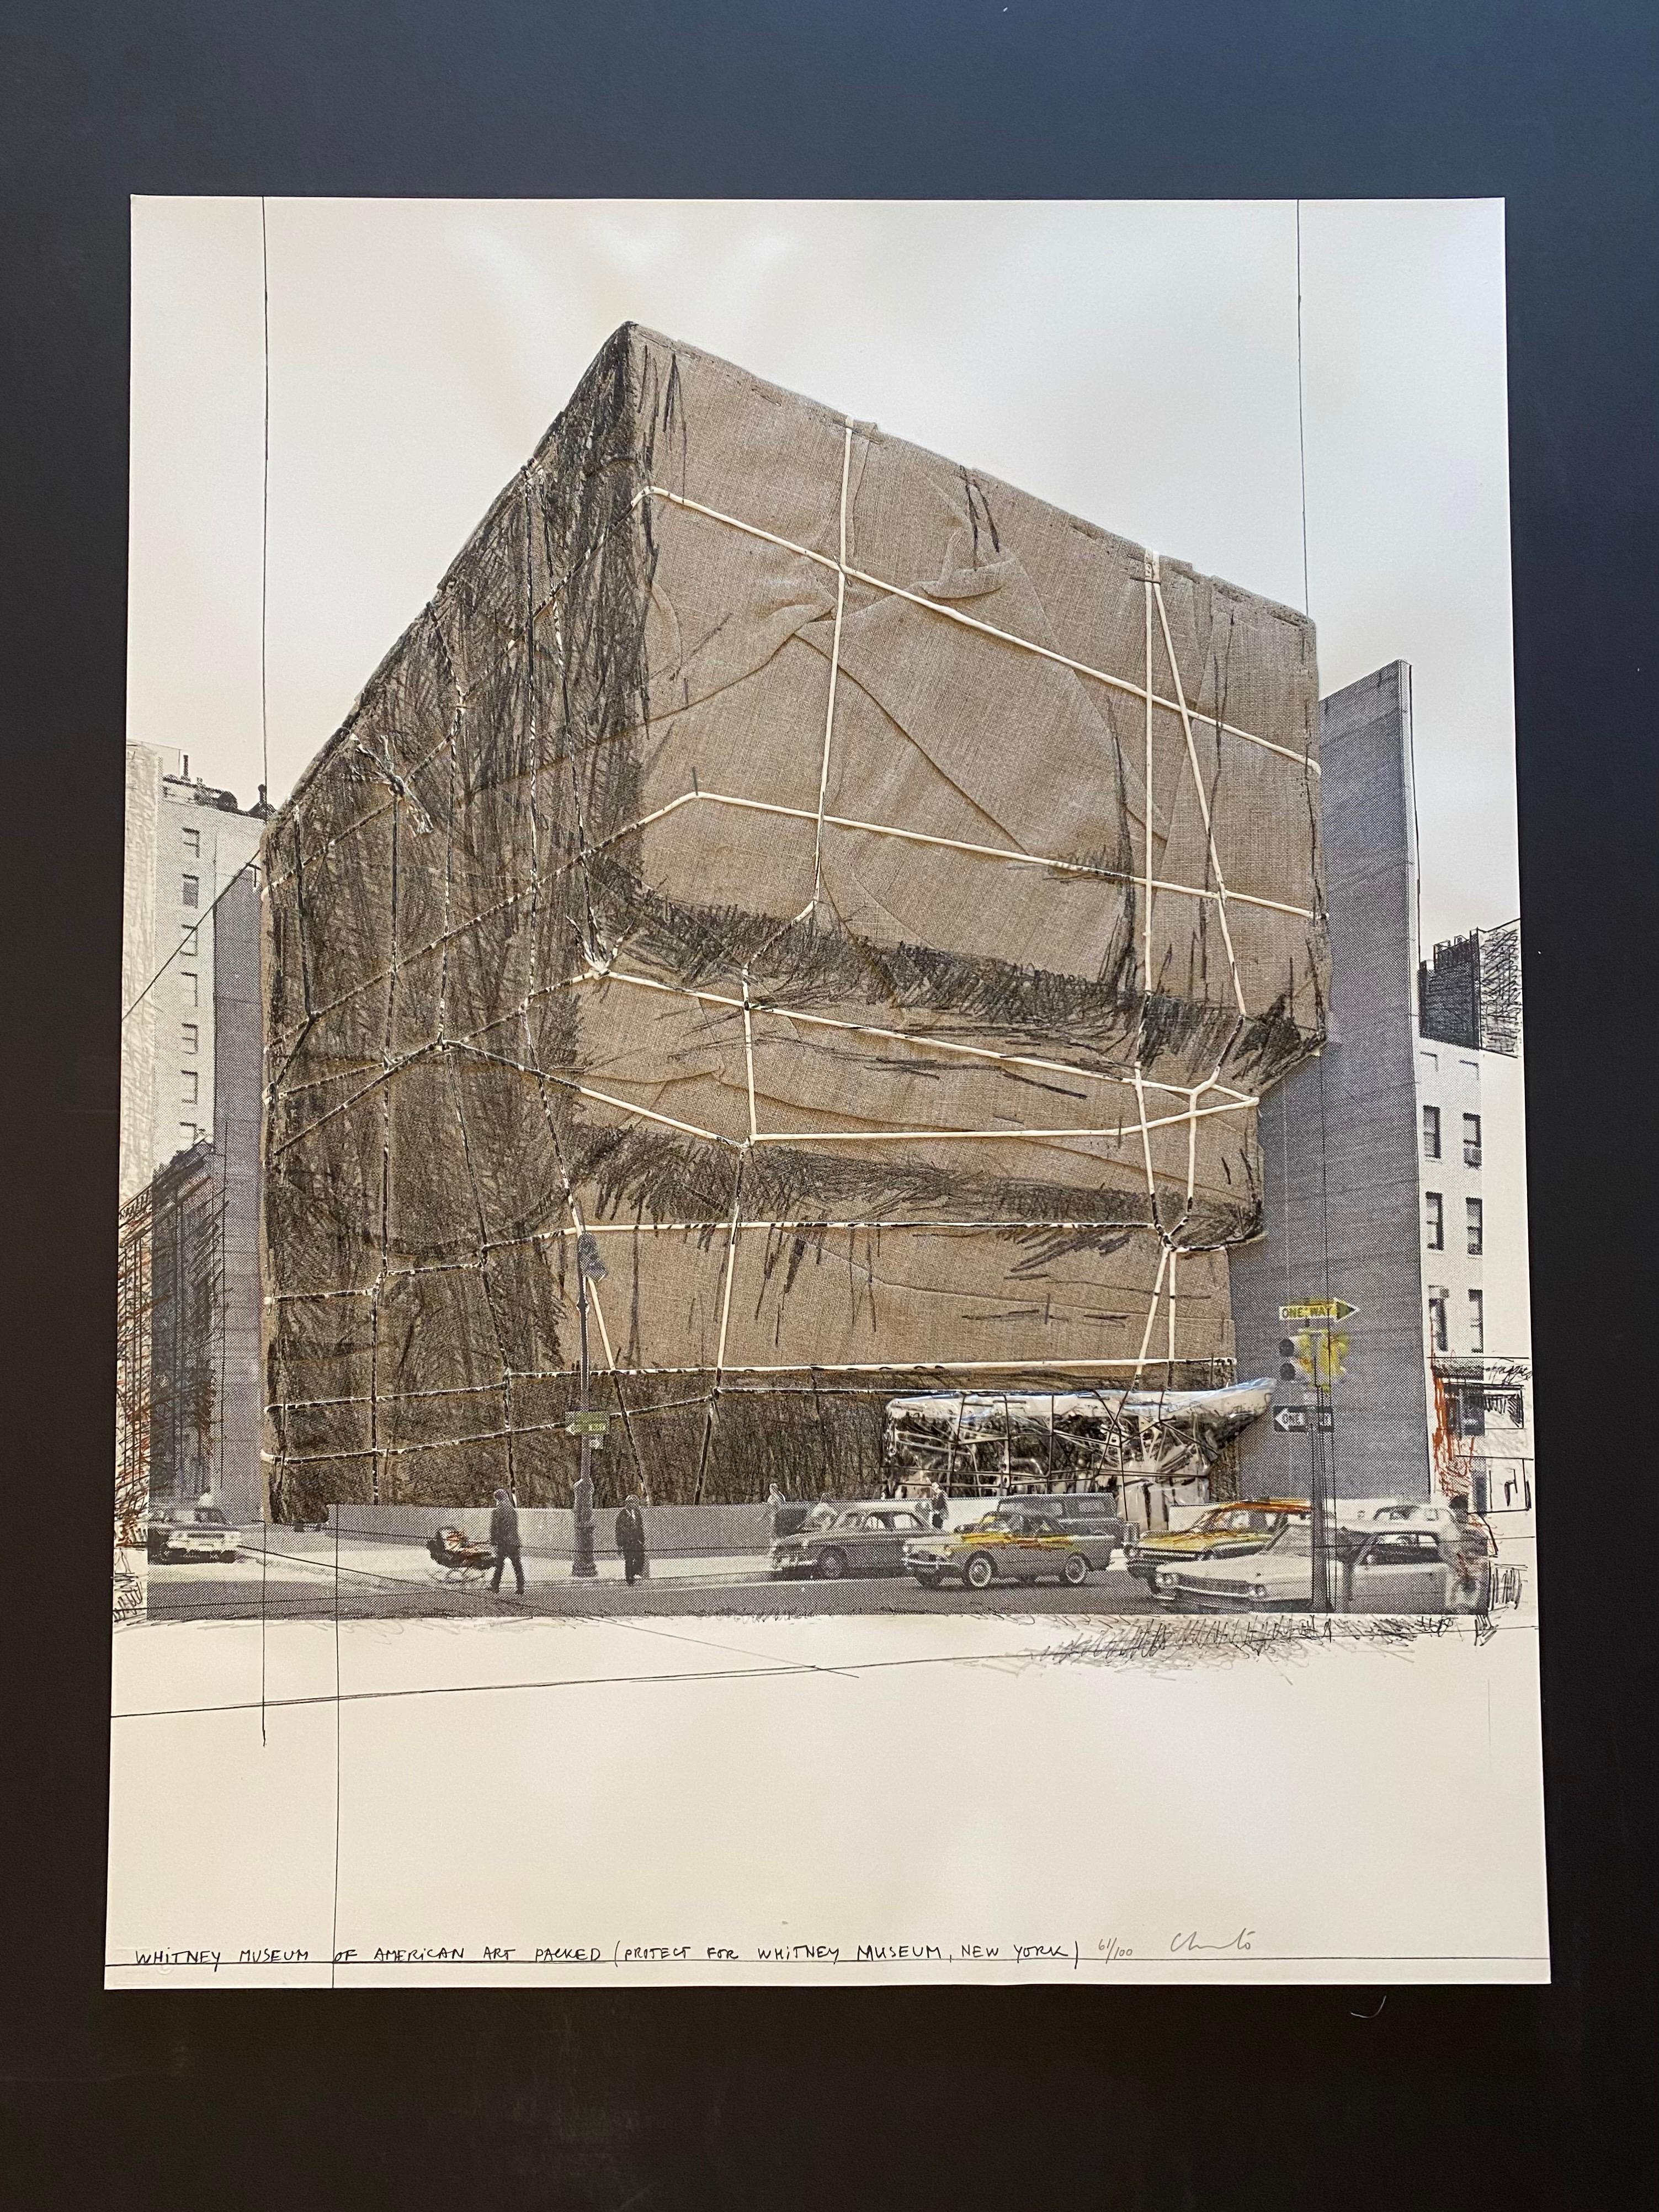 Whitney Museum of American Art, Packed, Project for New York - Print by Christo and Jeanne-Claude